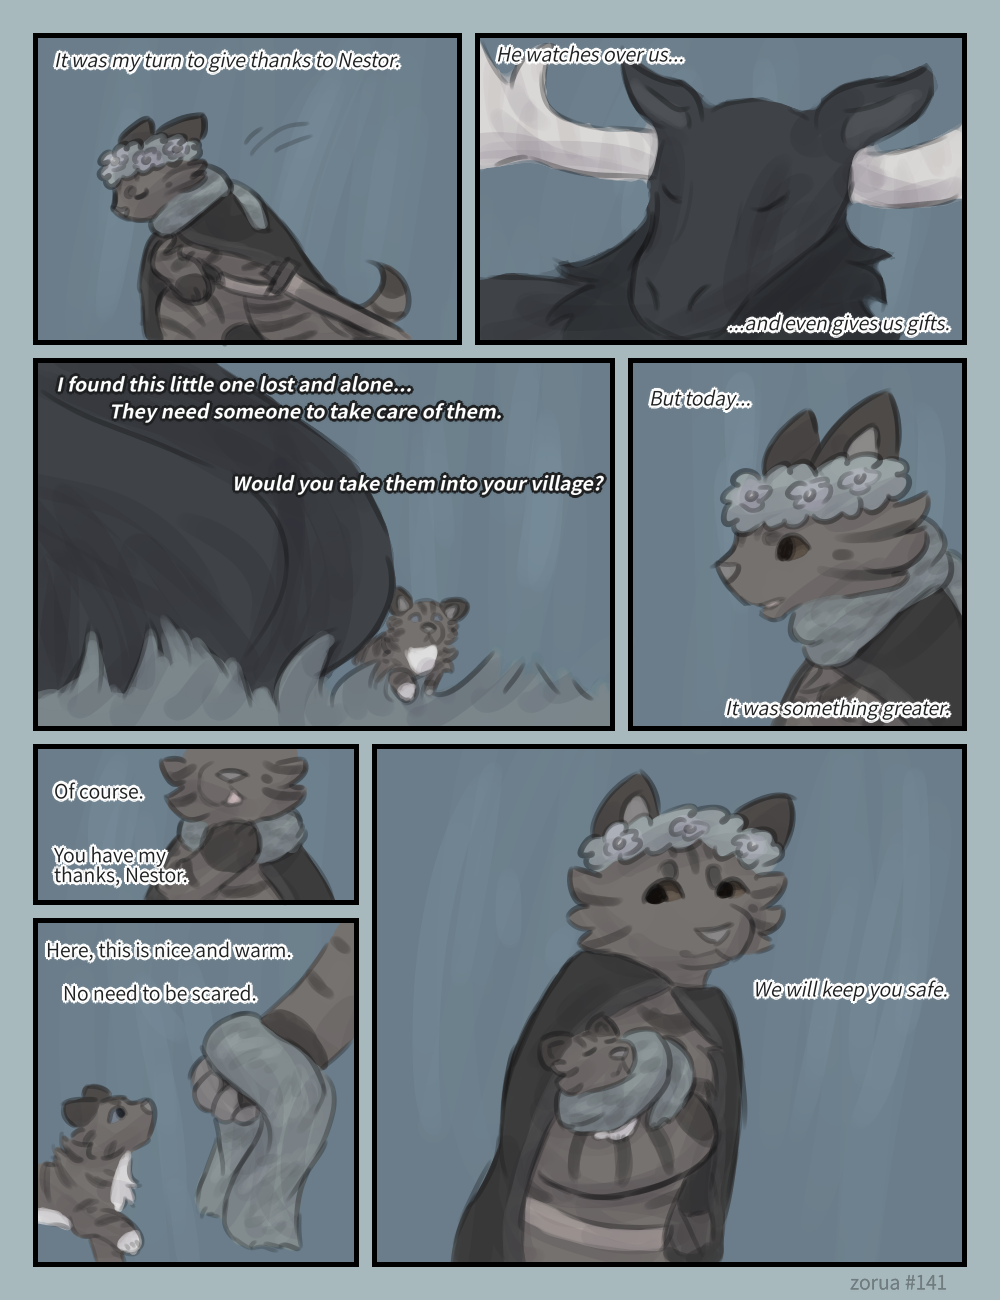 a comic of towerlock receiving cobalt from nestor. nestor explains that he found them lost and alone, and towerlock agrees to take them home, thanking nestor once again. she hands cobalt her scarf, and wraps him up in it before walking home, promising to keep him safe.